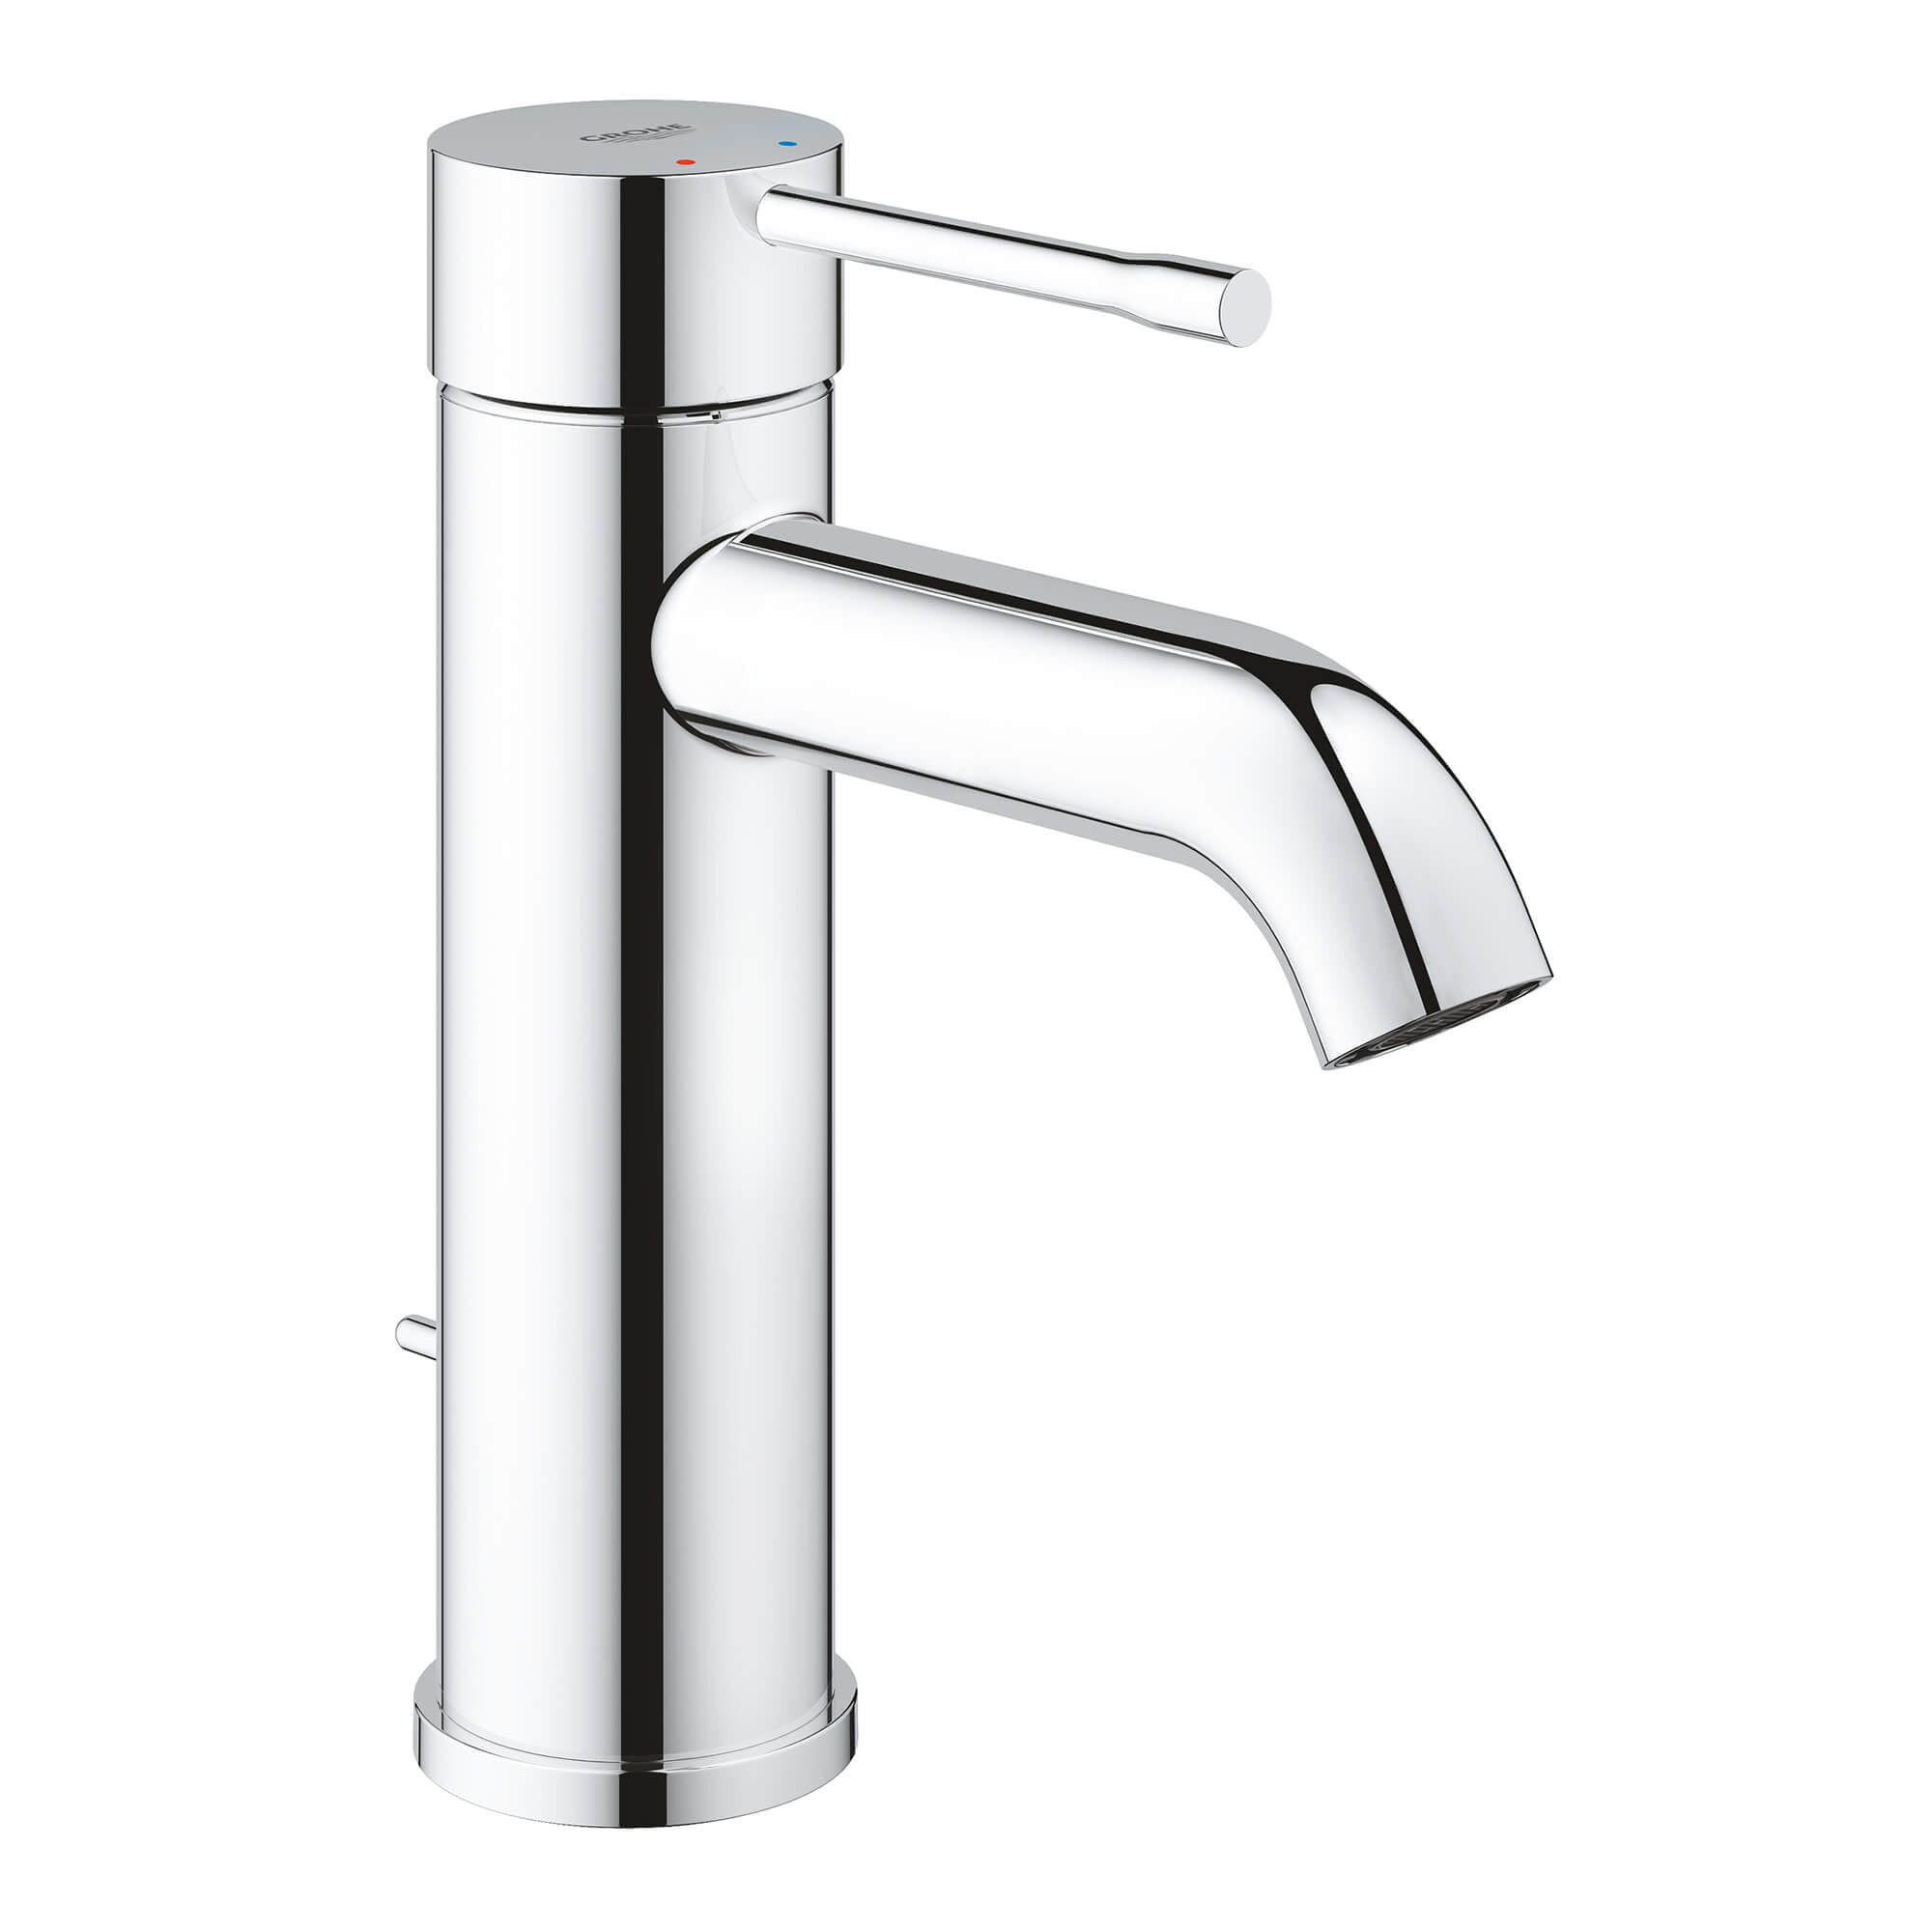 GROHE Grohe Start COS299322 Bathroom Sink Taps 4005176462269 